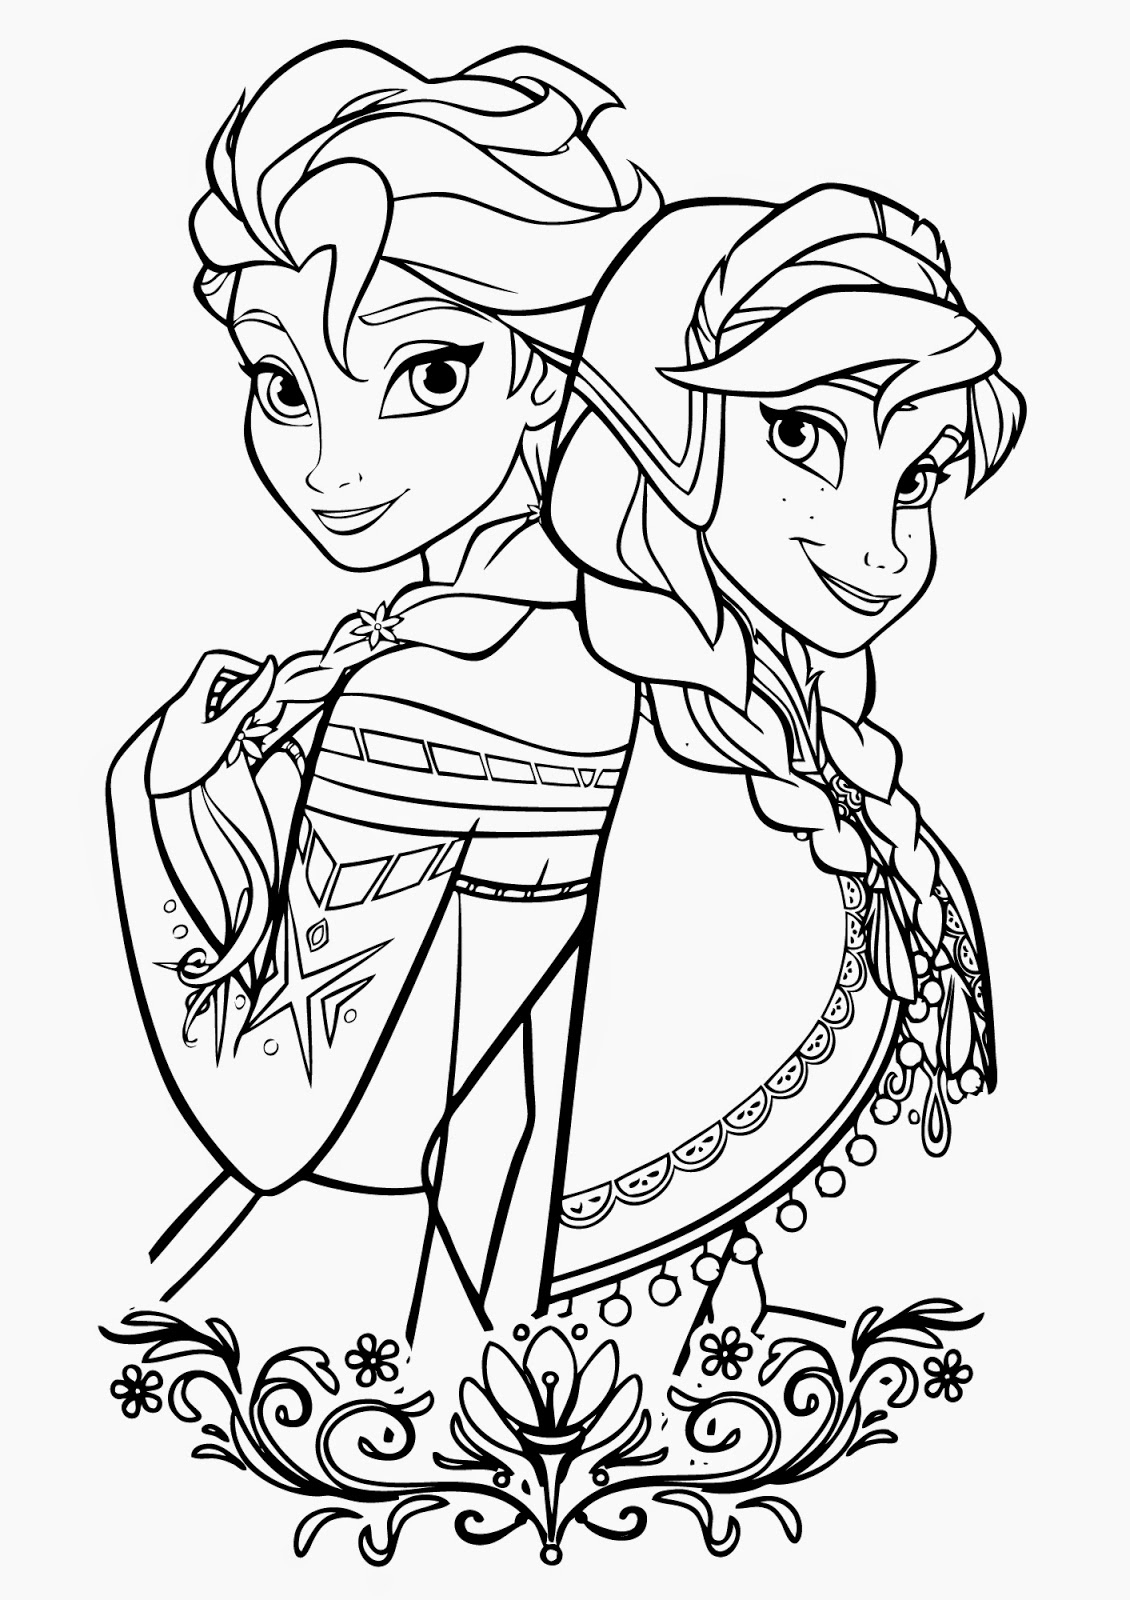 disney-characters-printable-coloring-pages-at-getdrawings-free-download